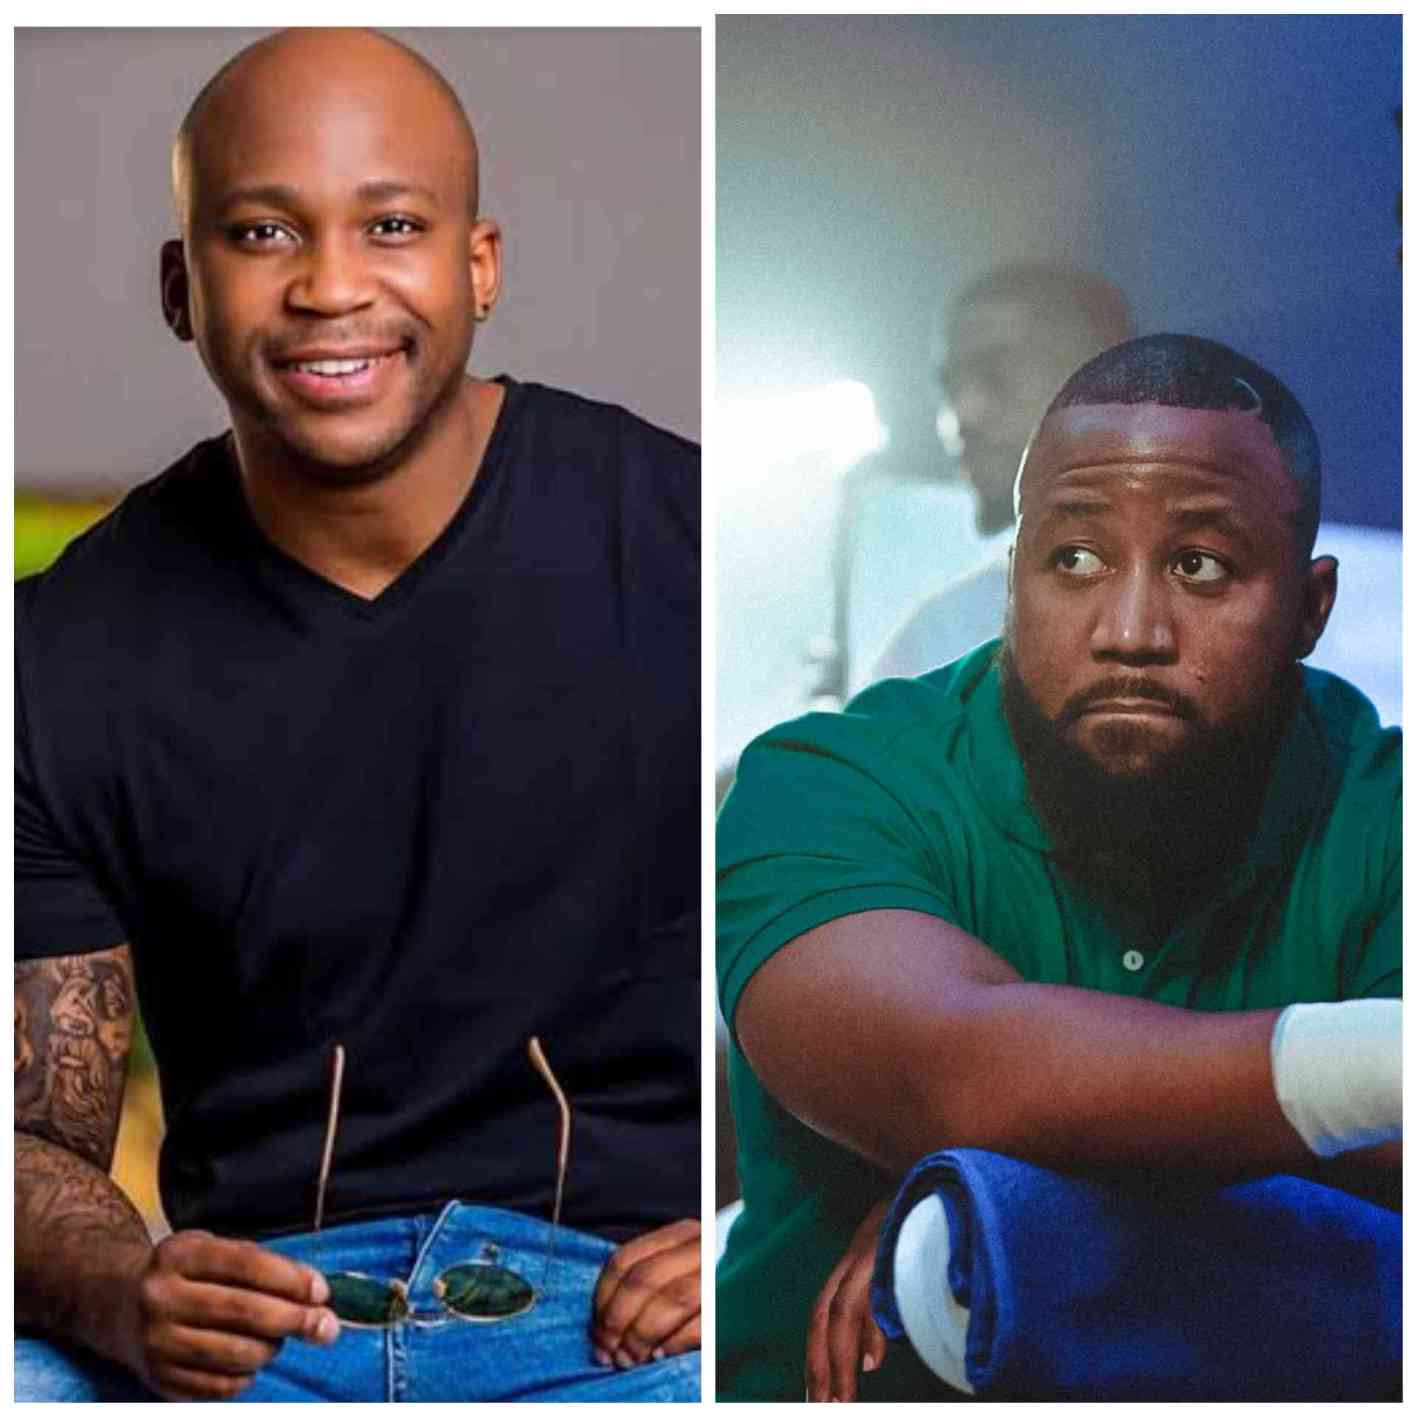 NaakMusiQ taunts Cassper Nyovest ahead of their boxing match